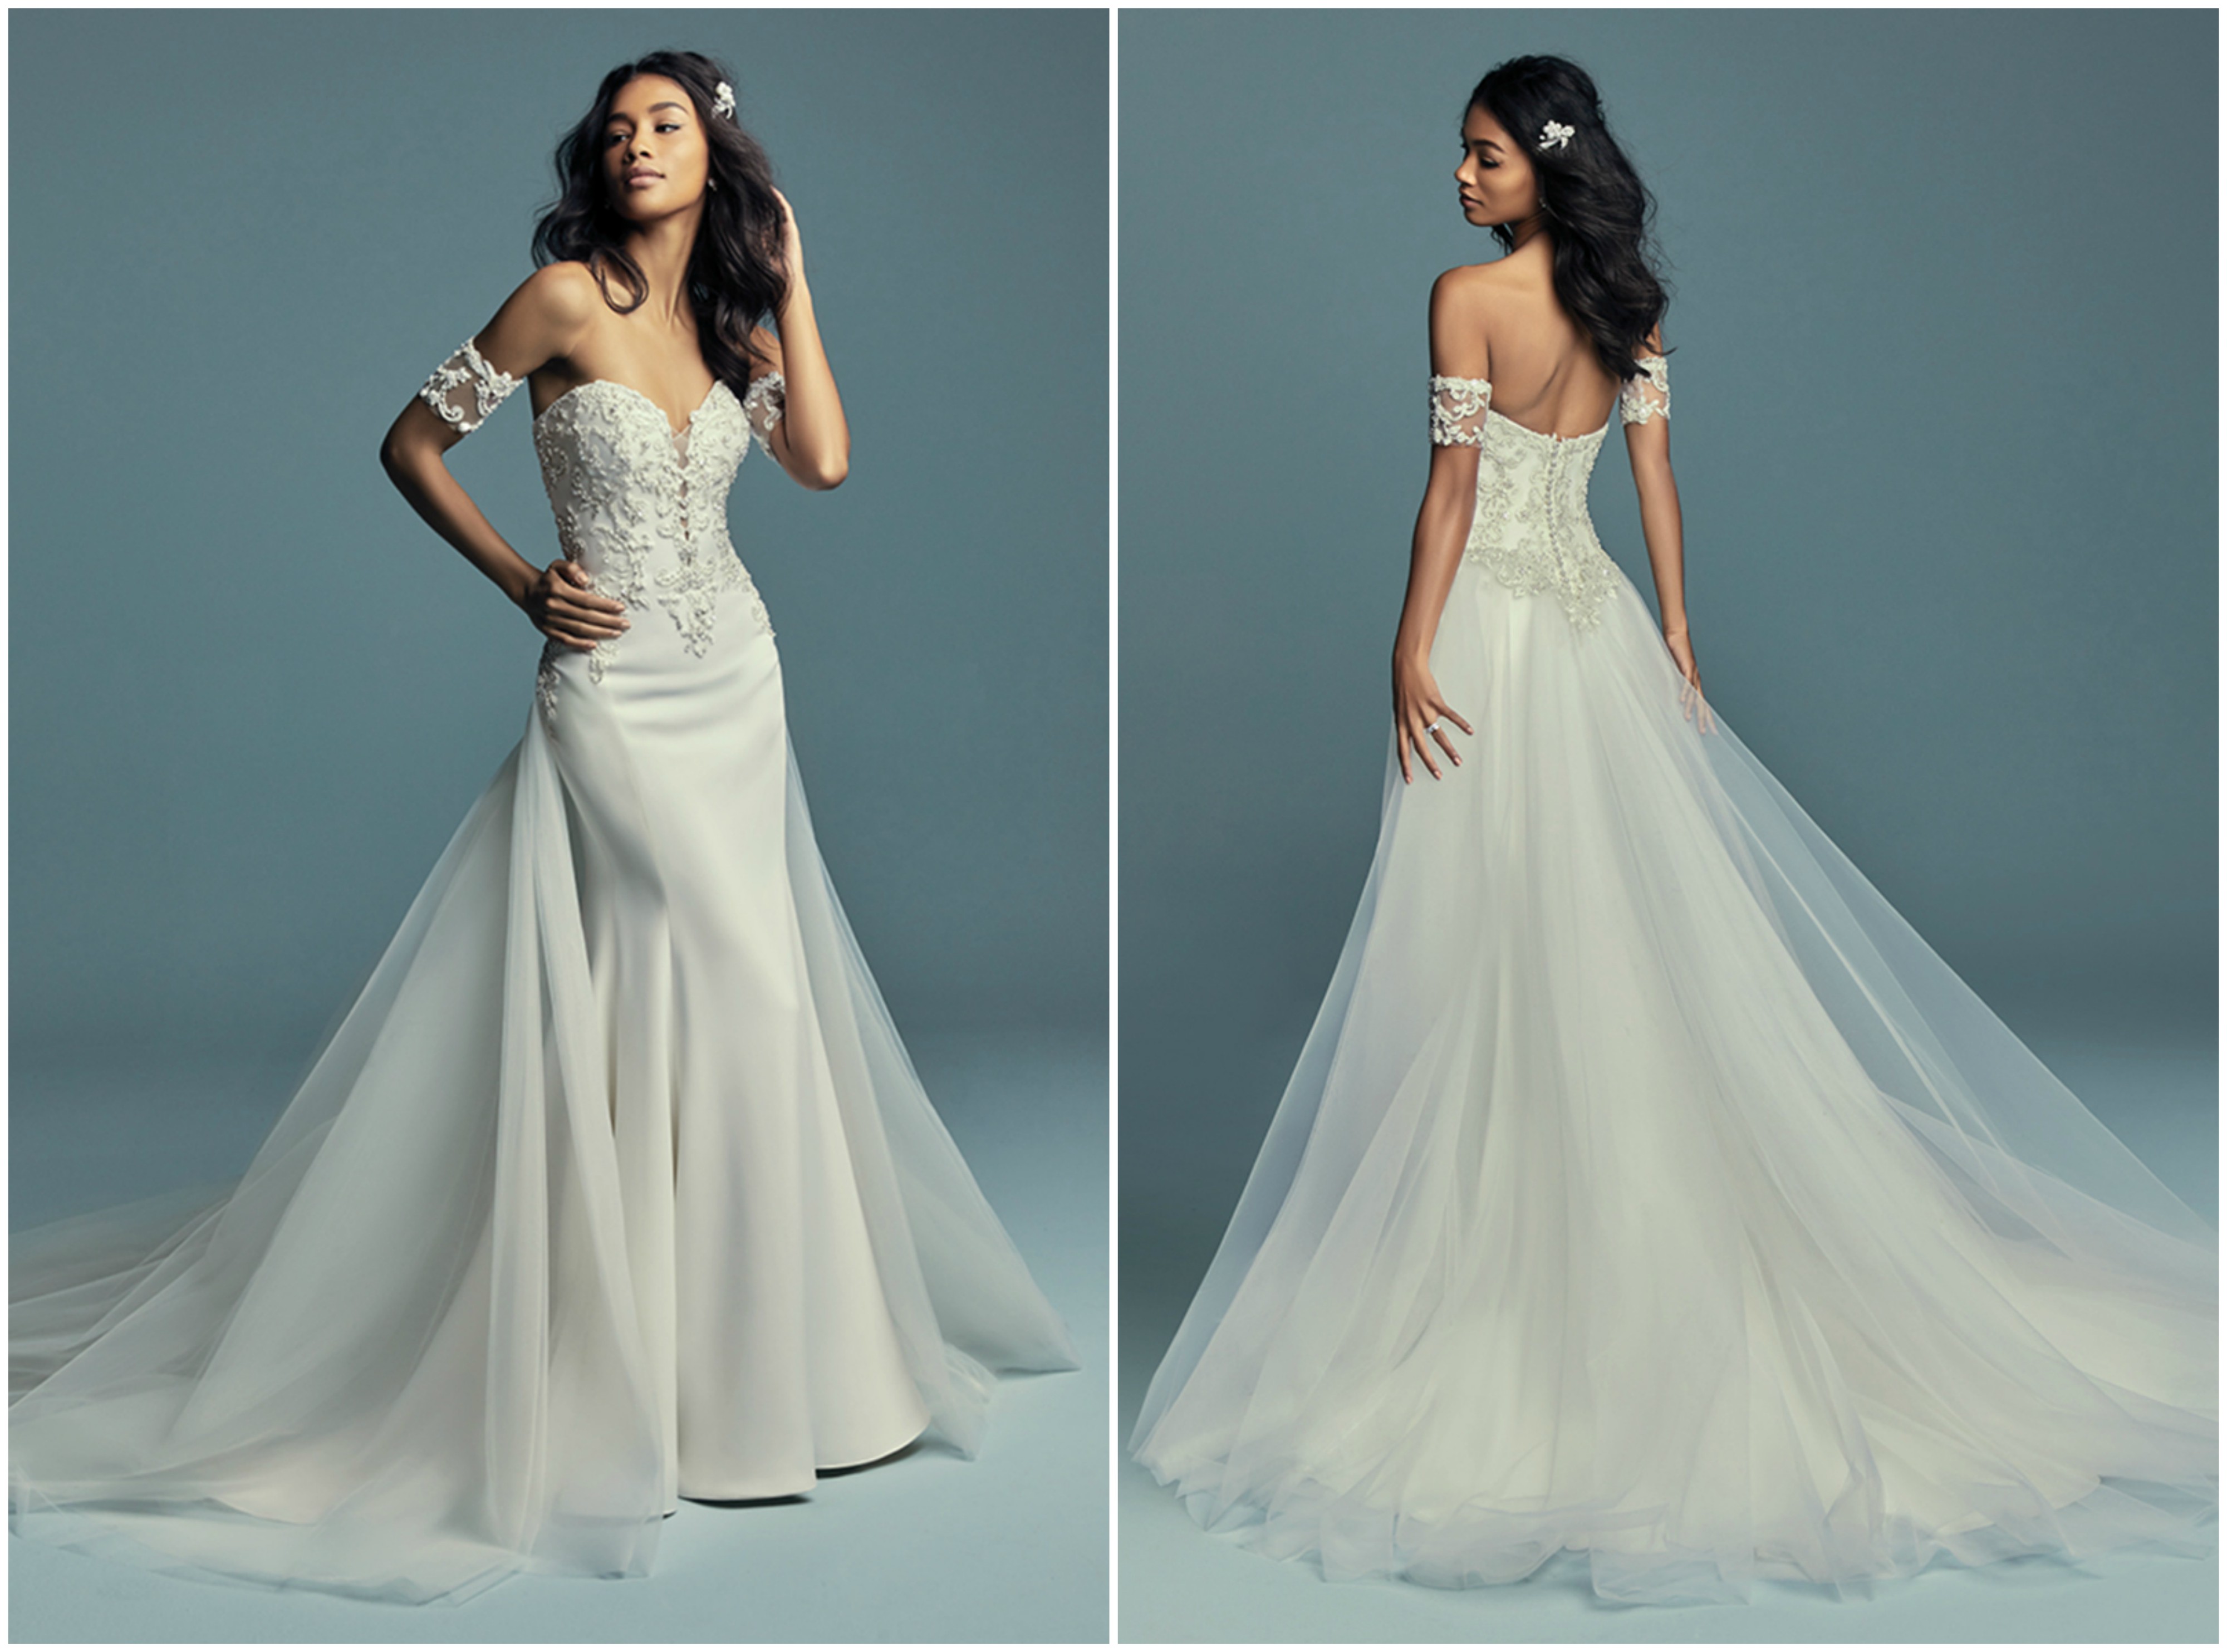 <a href="https://www.maggiesottero.com/maggie-sottero/kimbra/11490" target="_blank">Maggie Sottero</a>